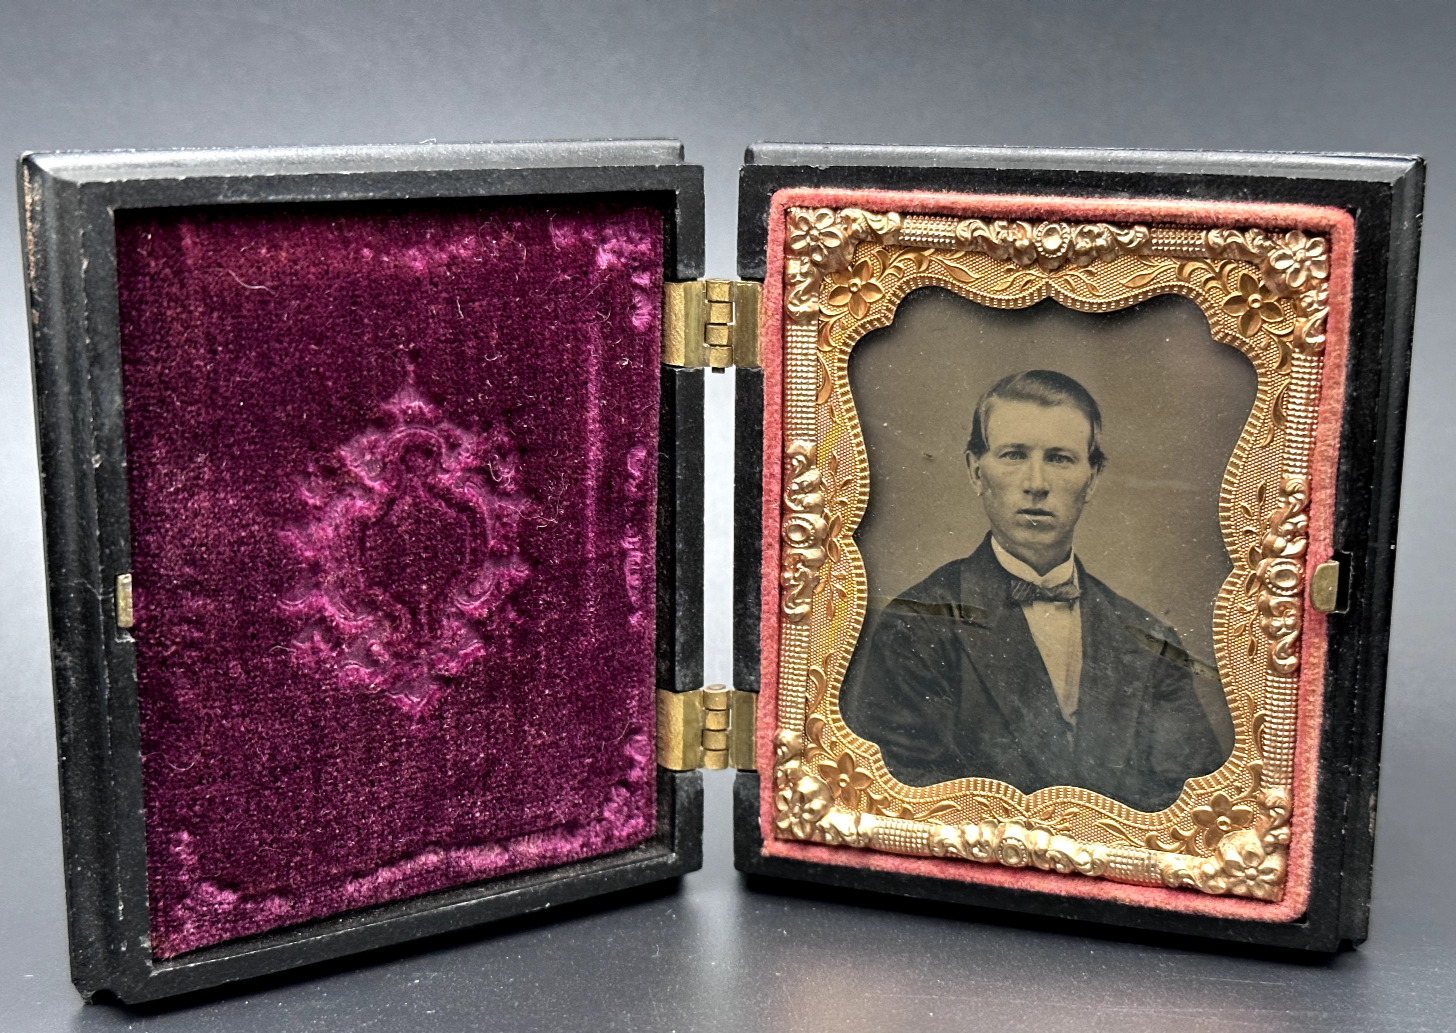 IMAGE OF (FAMOUS?) YOUNG MAN IN SUIT IN GUTTA PERCHA UNION PHOTO CASE - L548